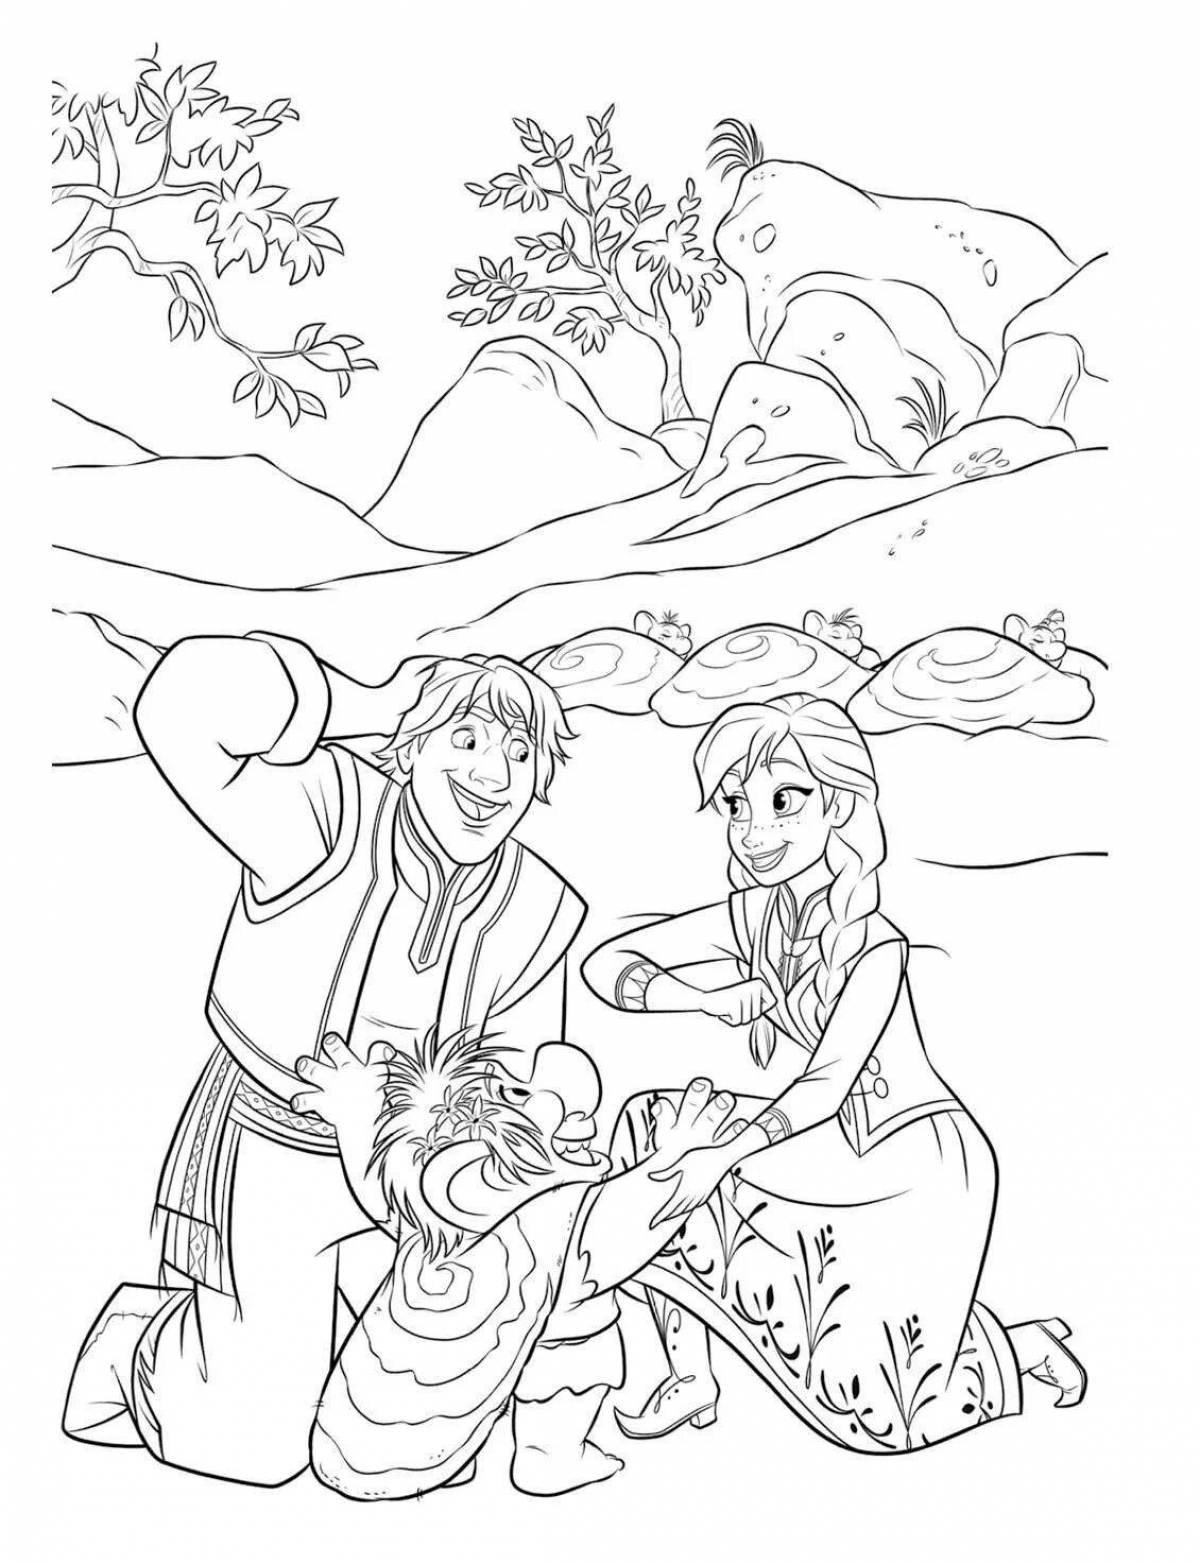 Funny kristoff cold heart coloring page